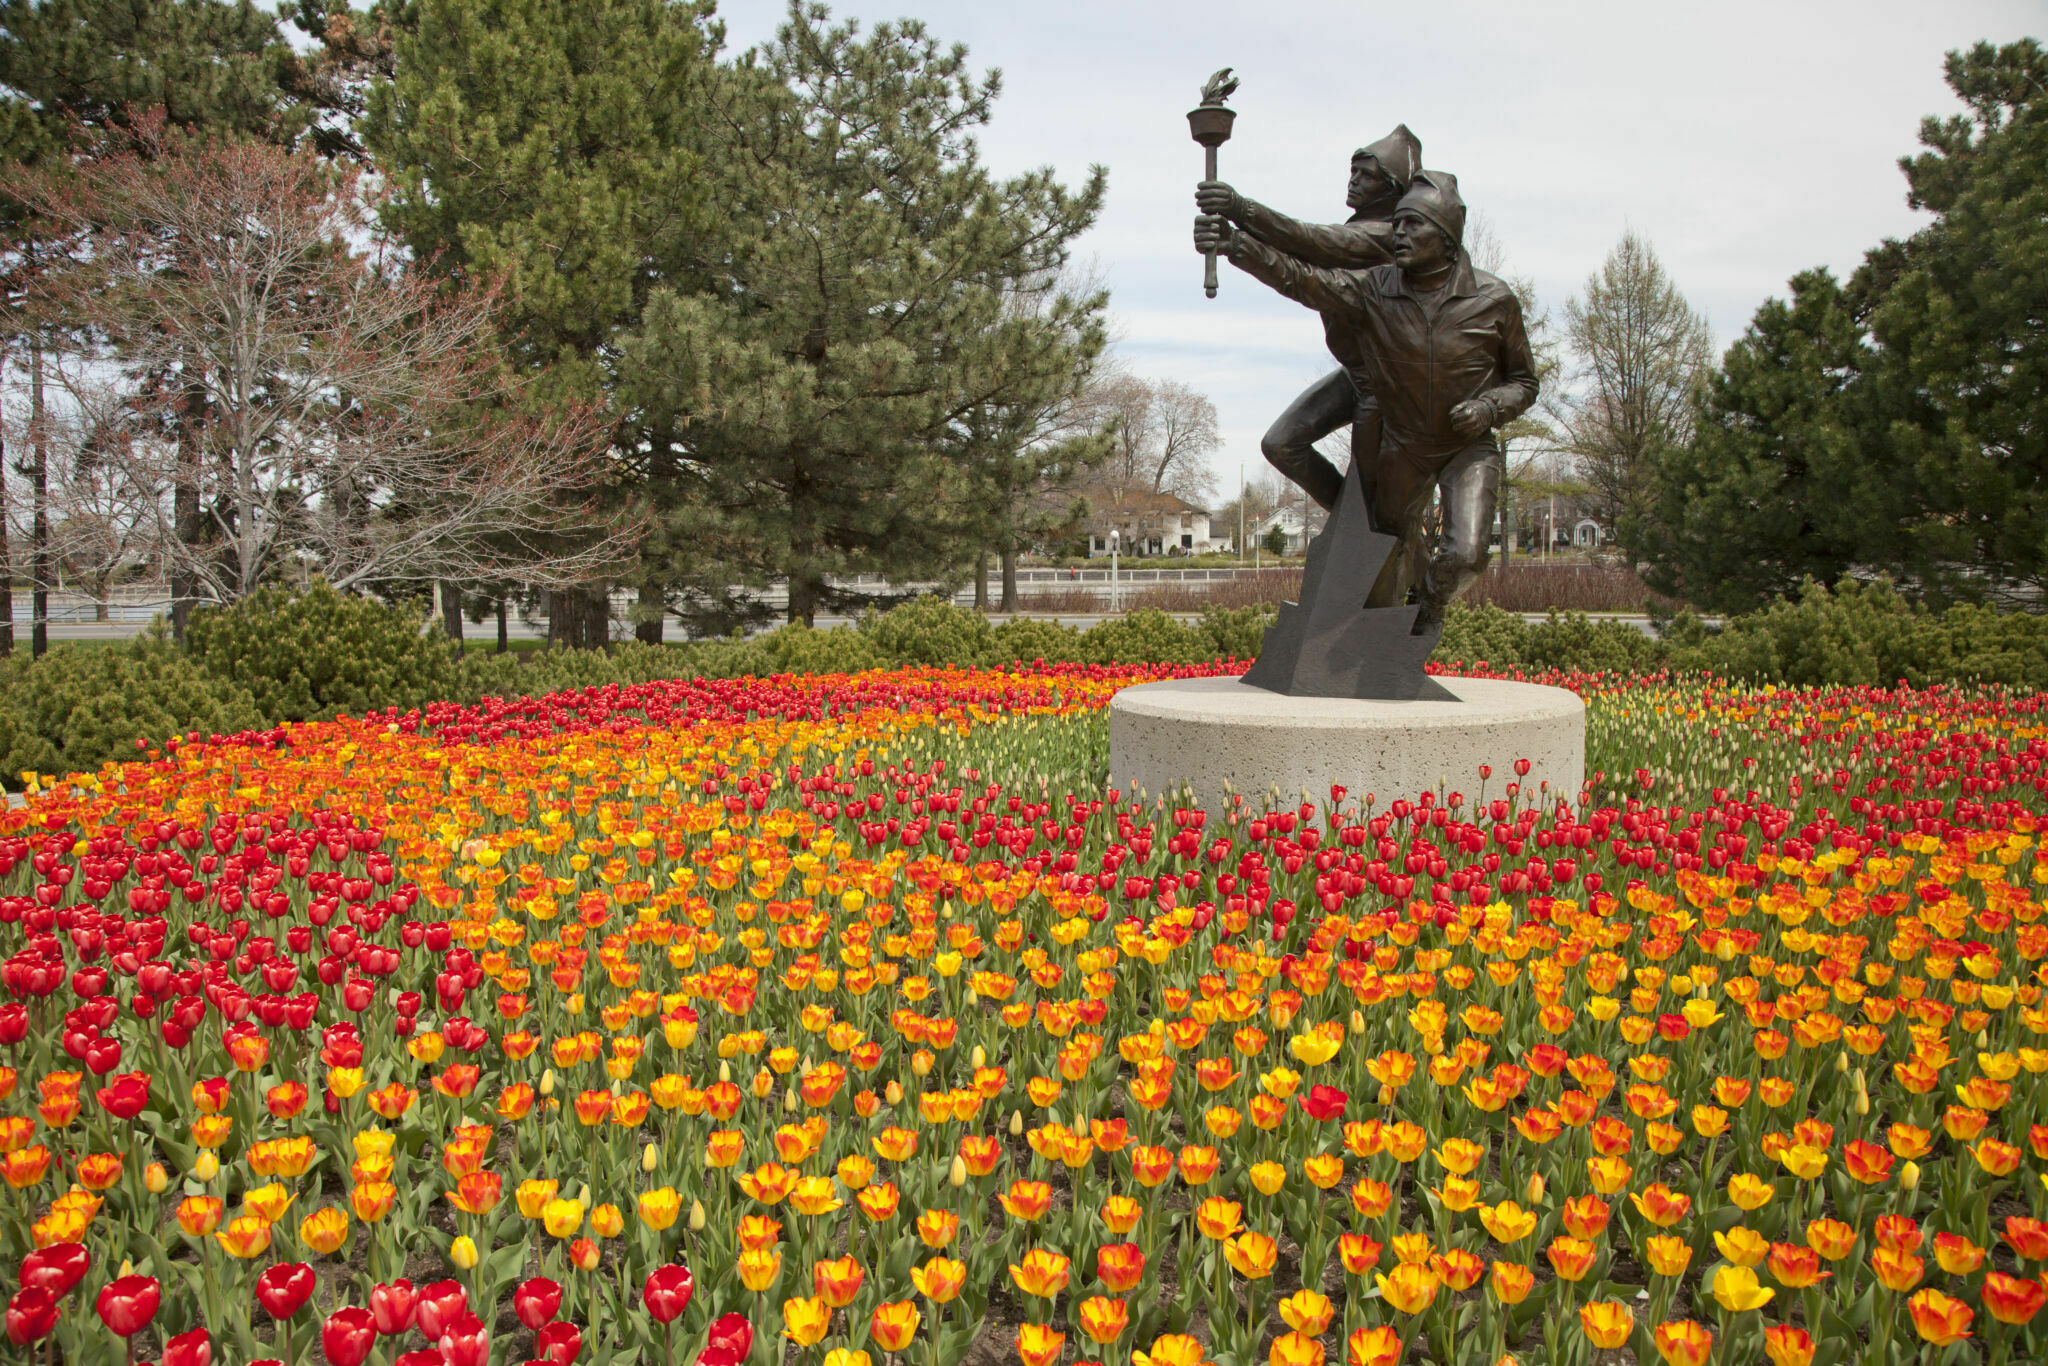 Yellow, orange and red tulips surrounding a bronze statue bearing an Olympic torch at the Olympic Garden.